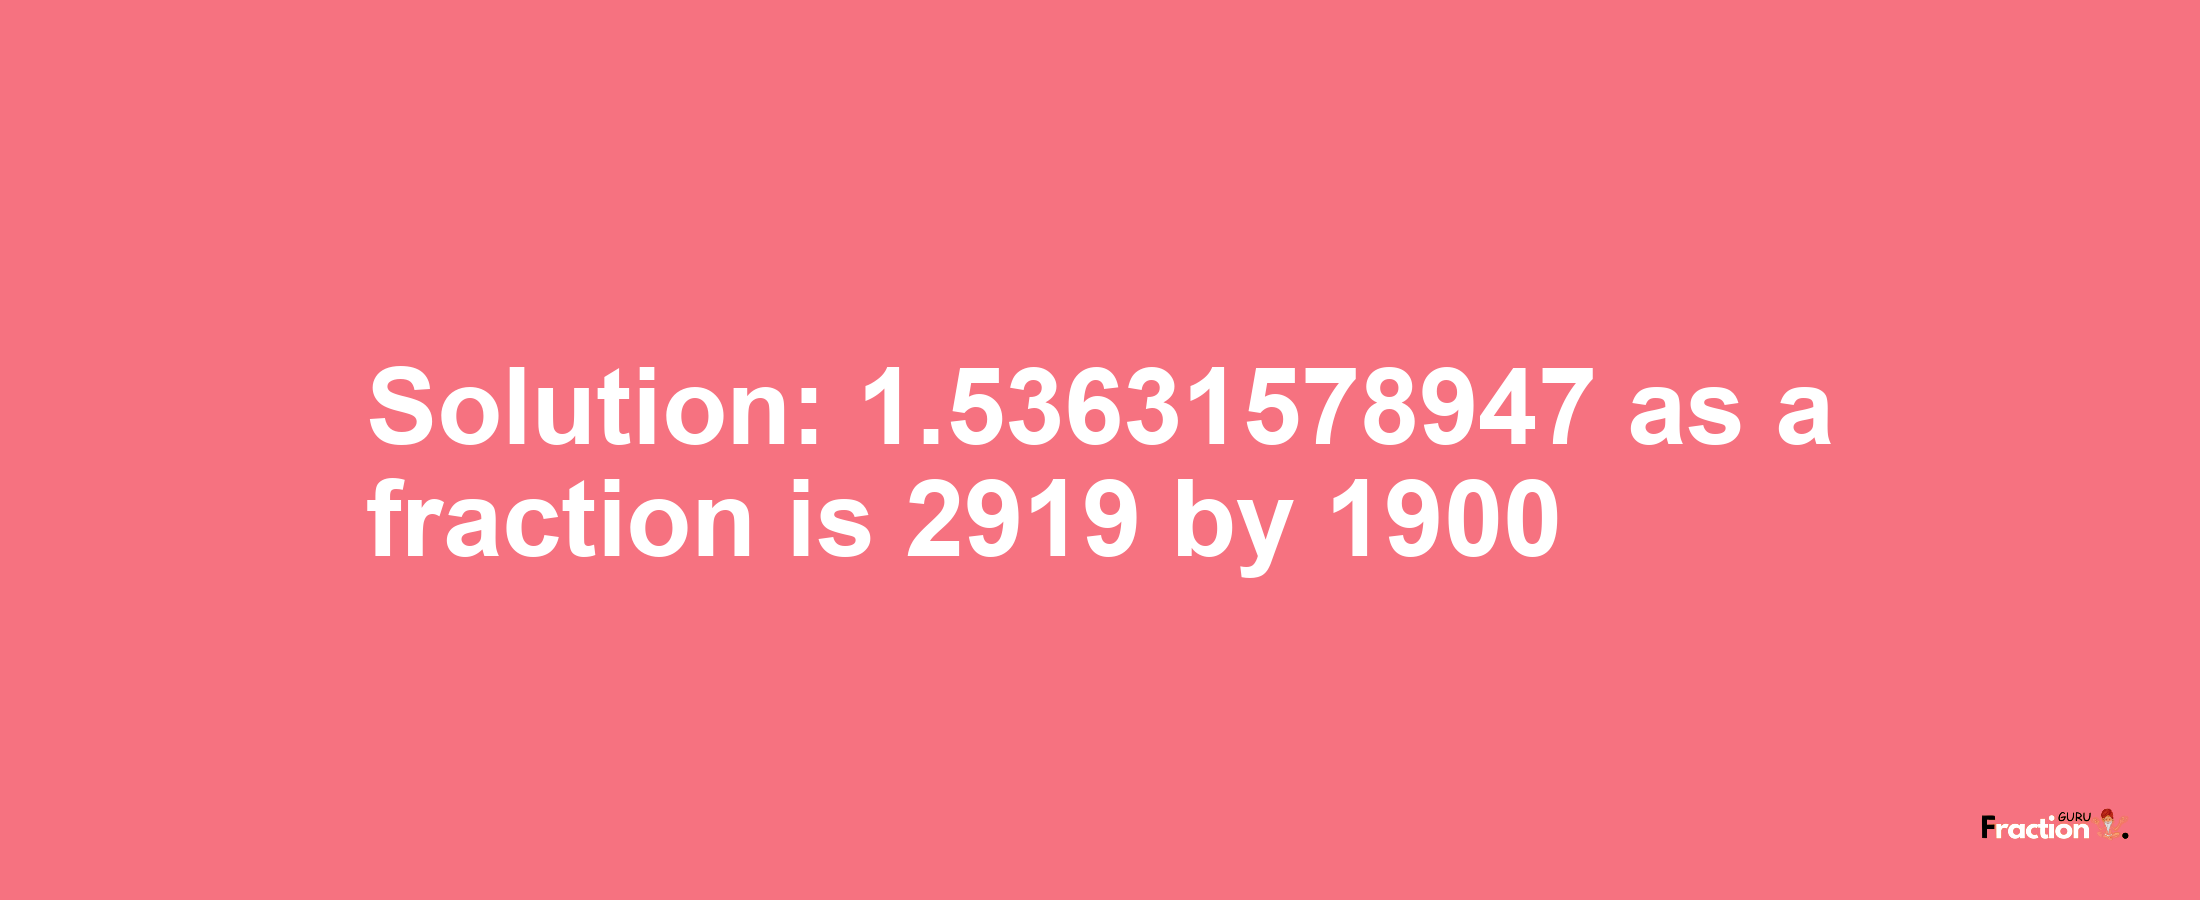 Solution:1.53631578947 as a fraction is 2919/1900